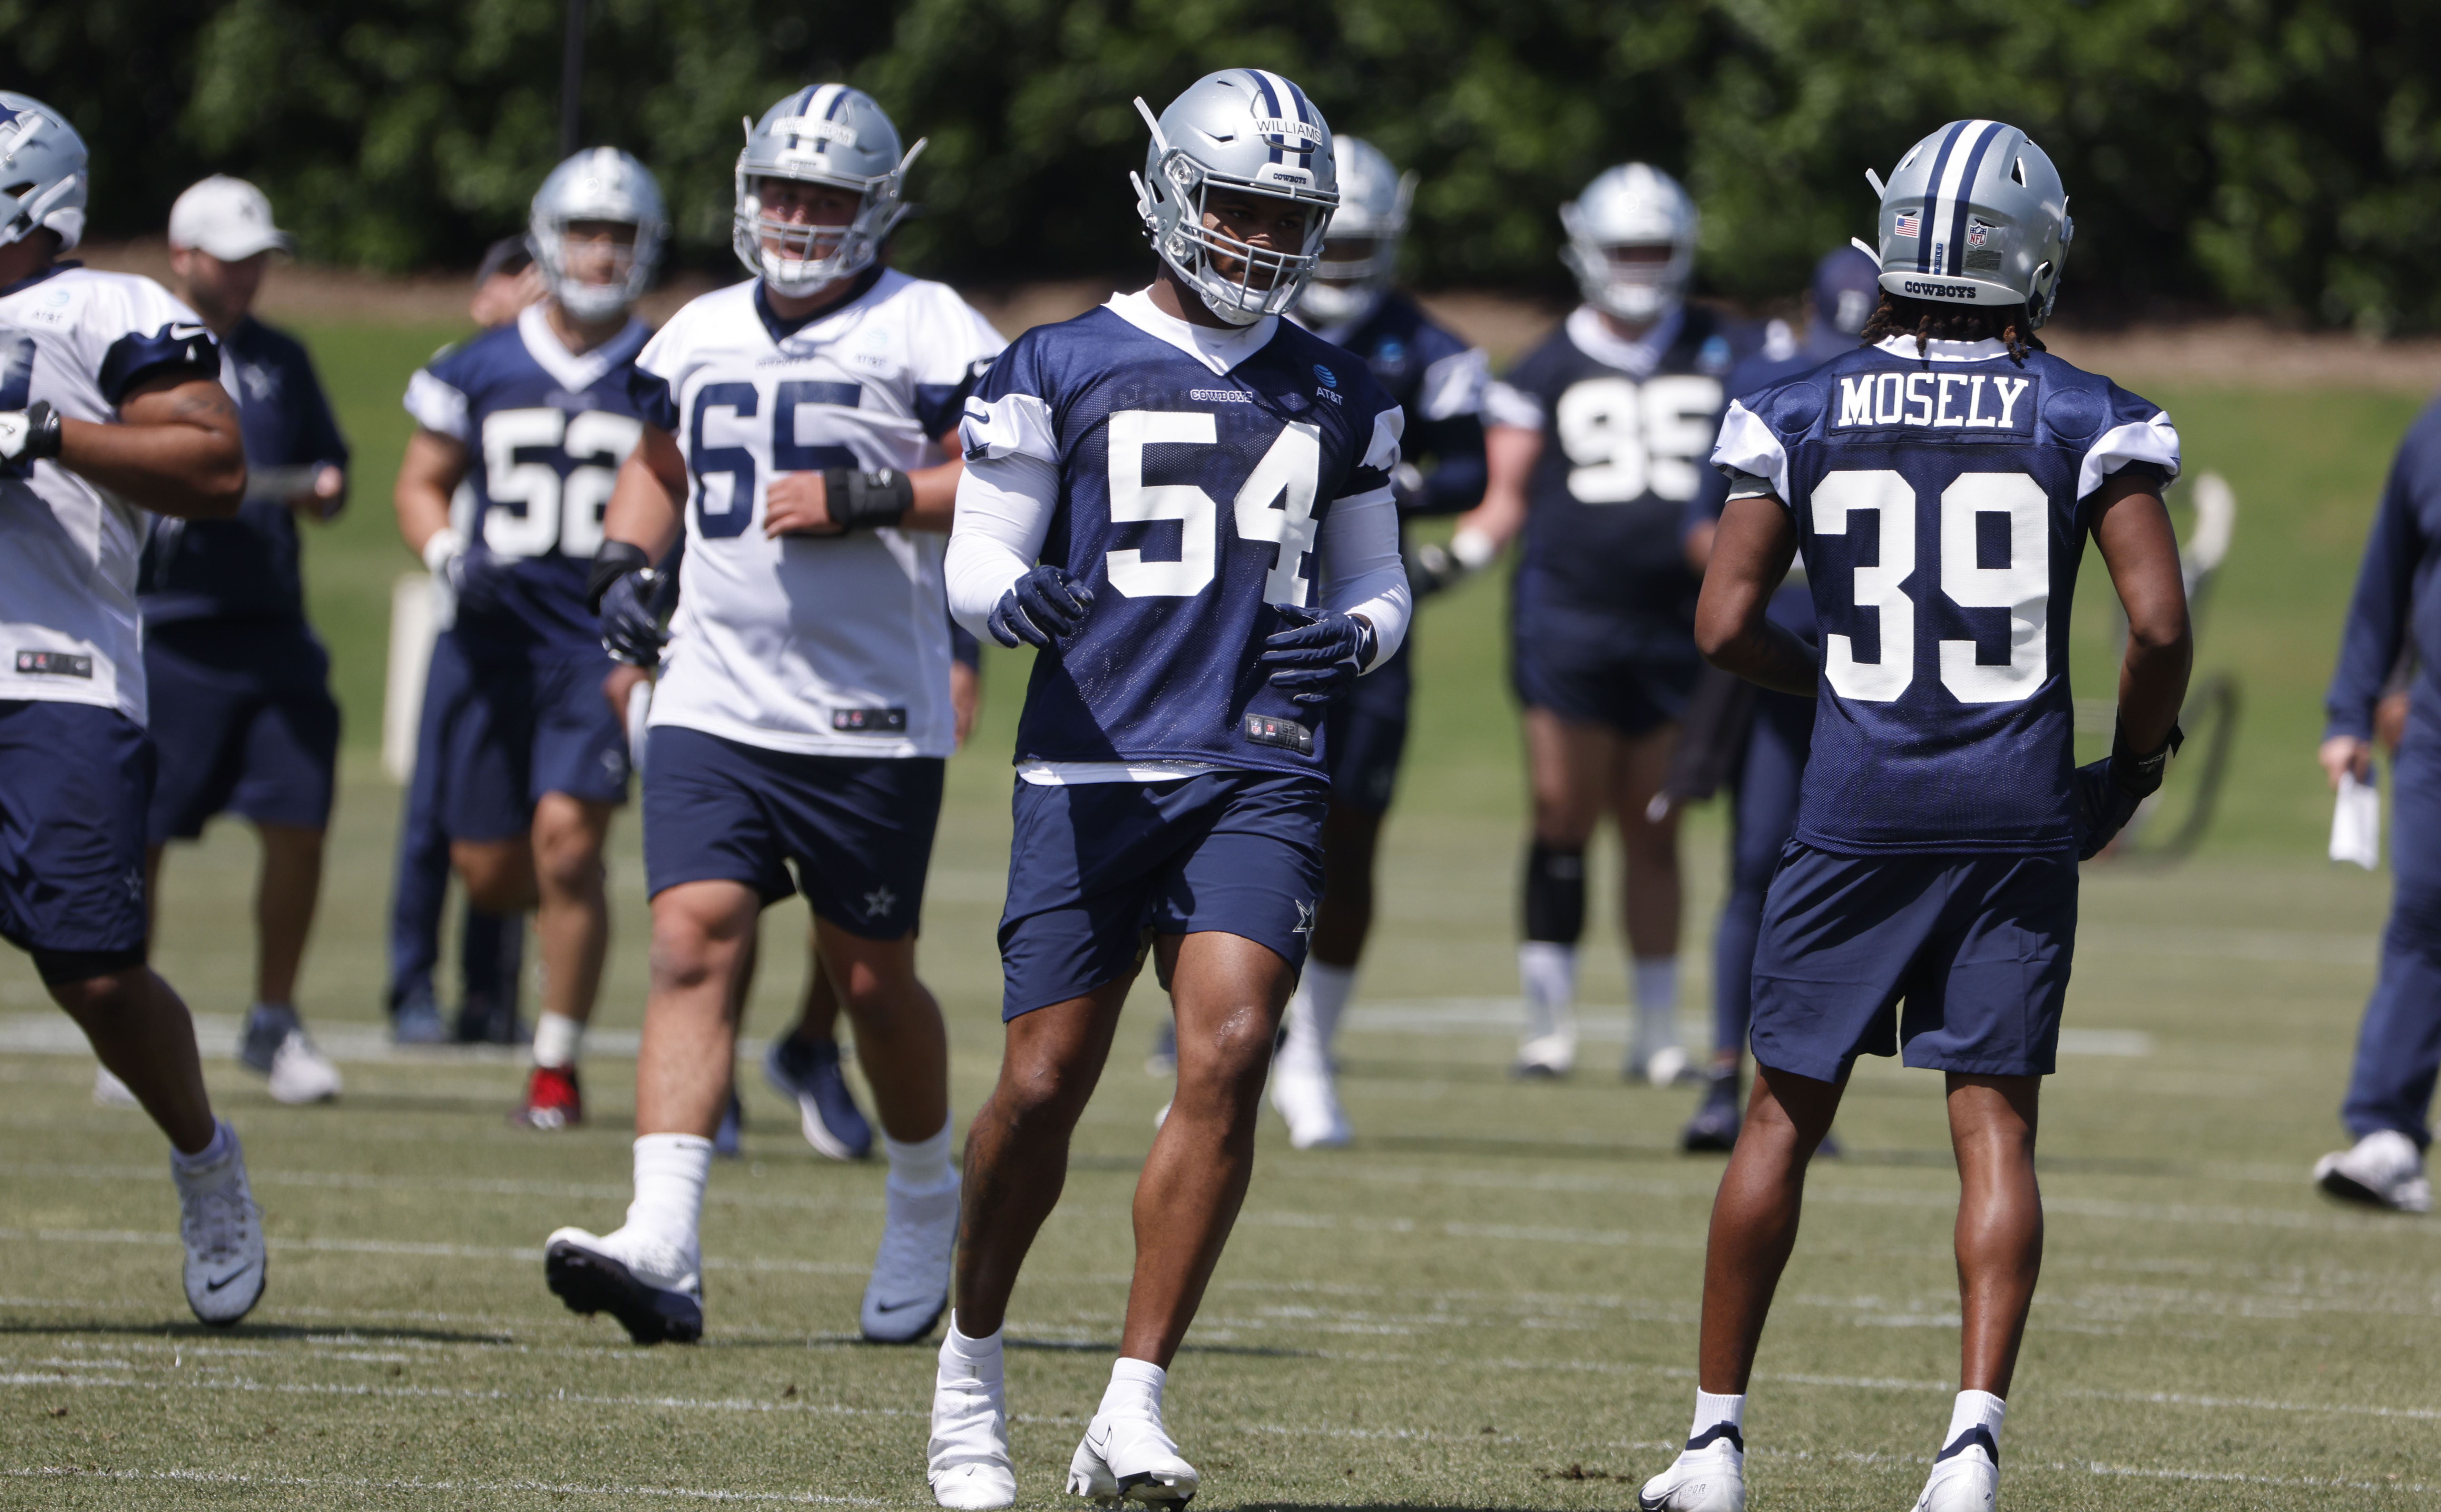 Cowboys' KaVontae Turpin shocked by Jerry Jones' Pro Bowl call